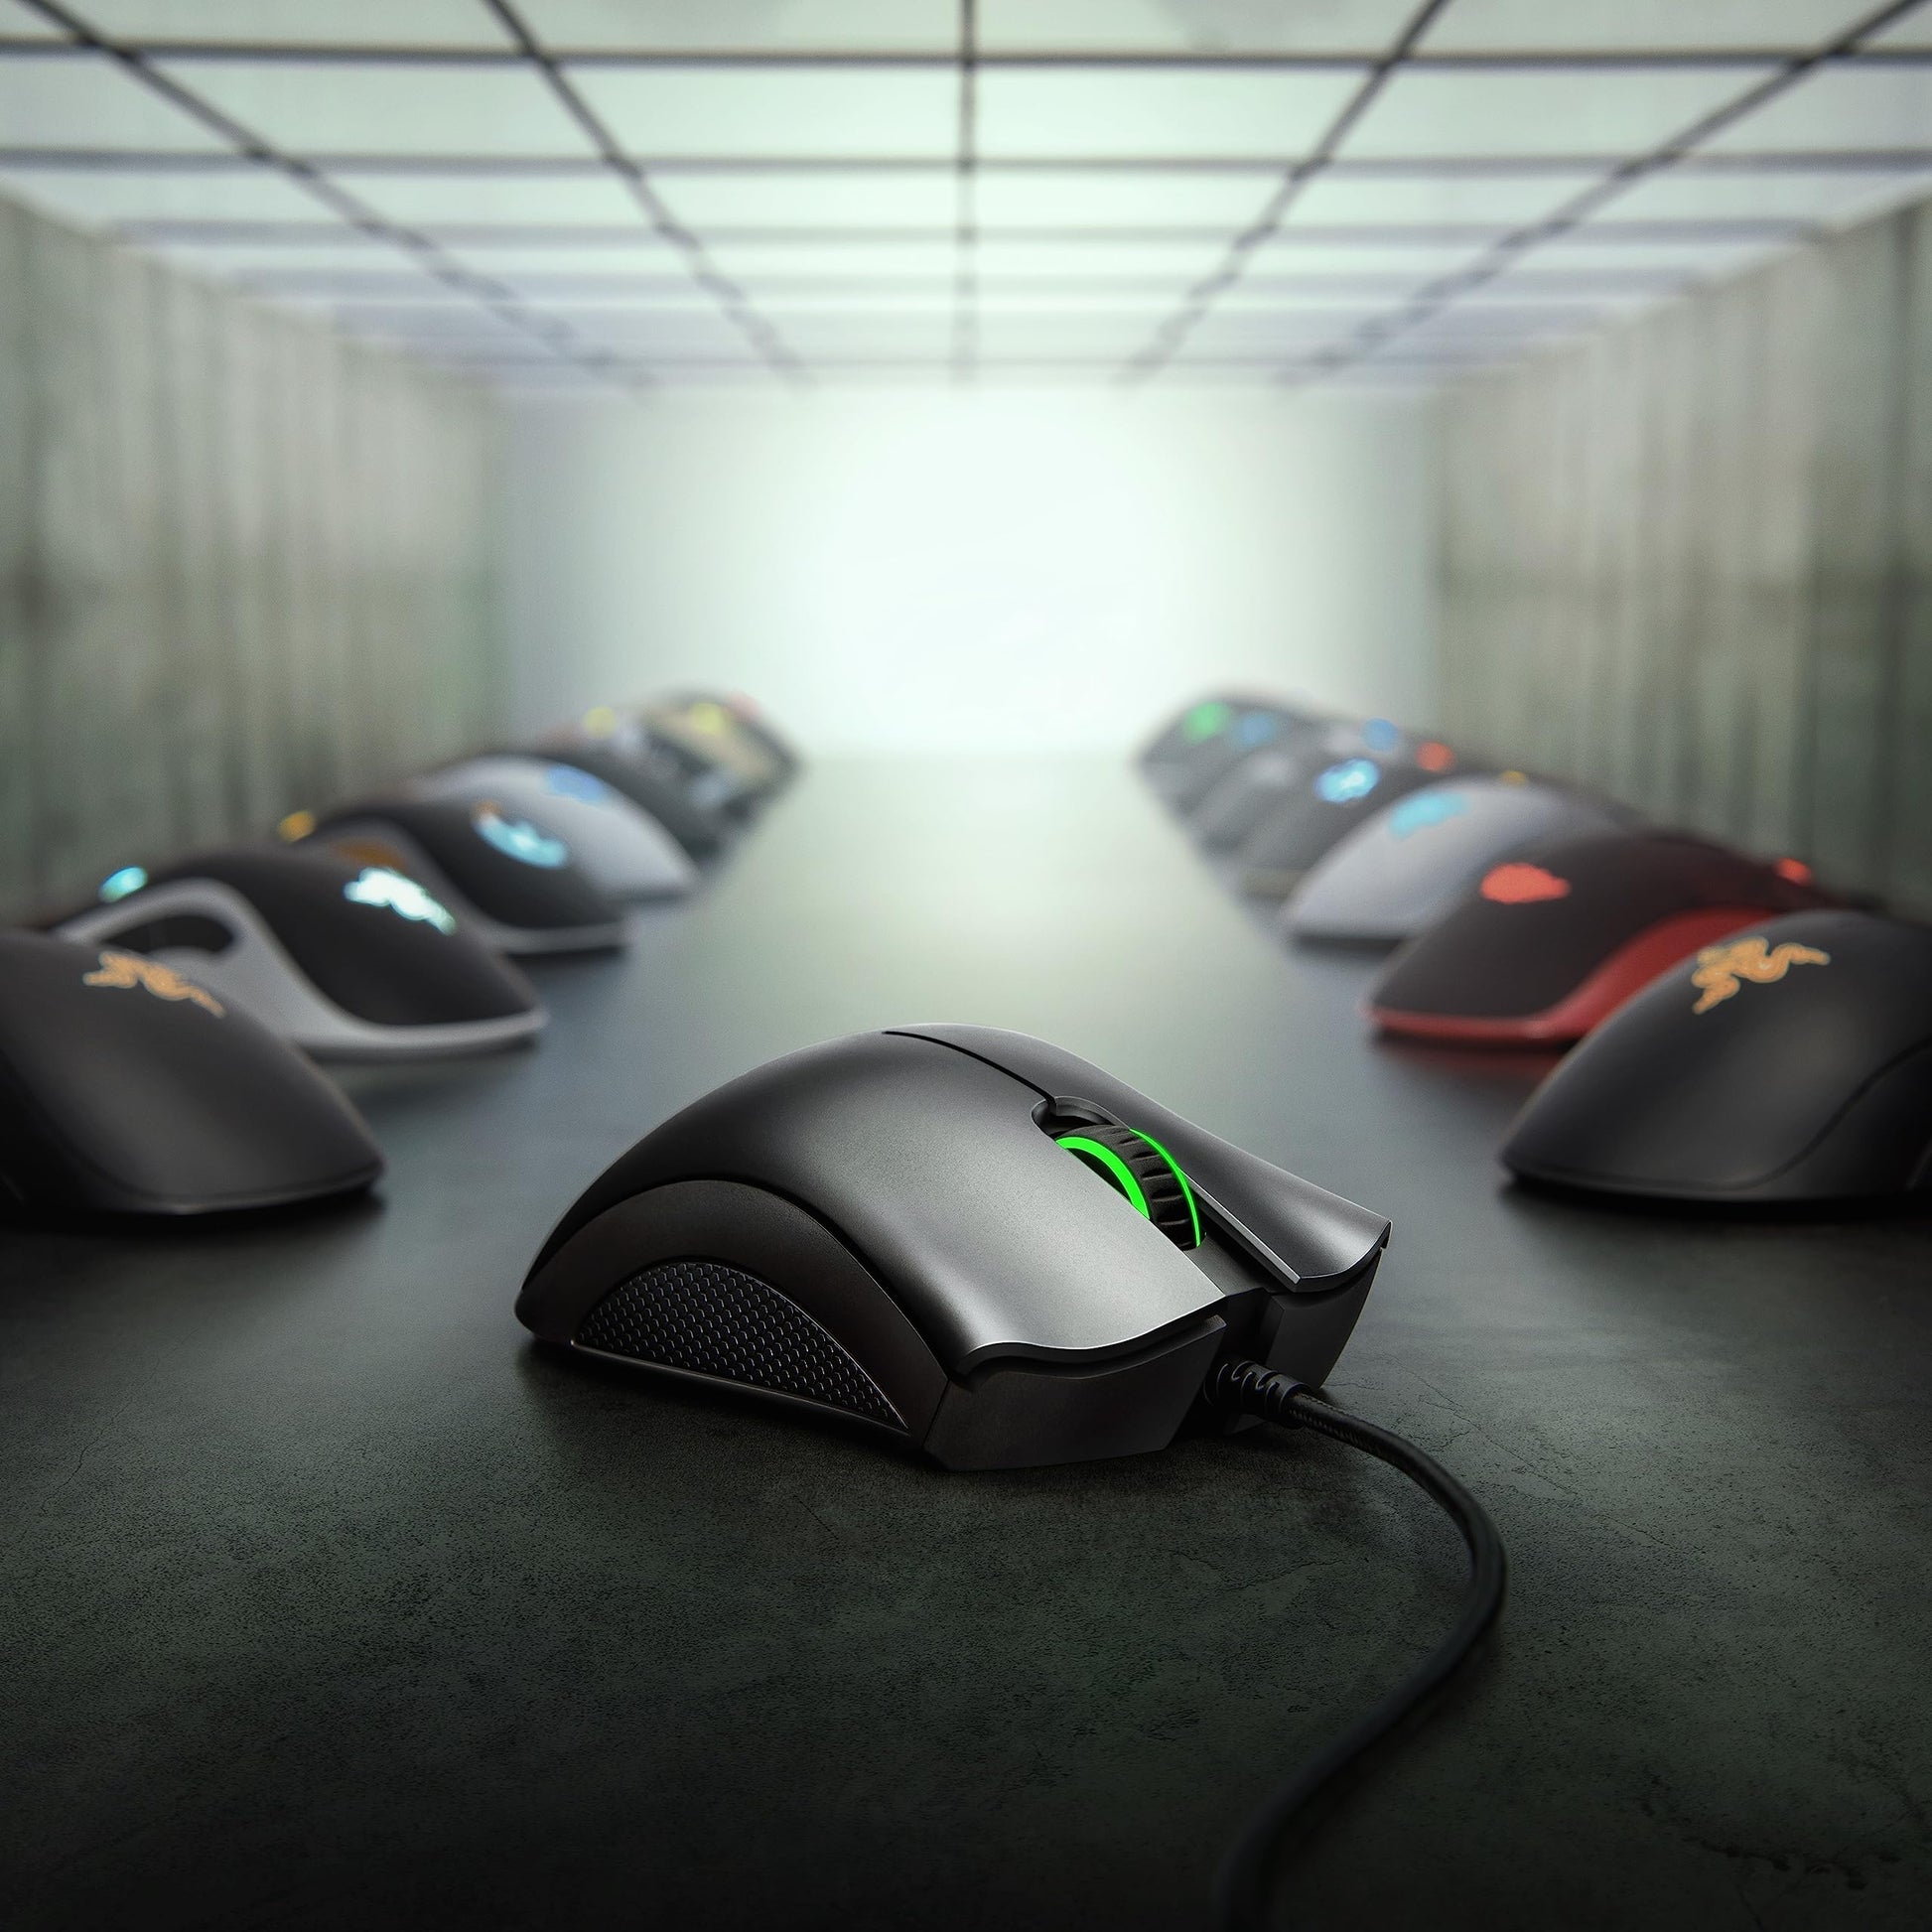 Razer DeathAdder Essential Gaming Mouse: 6400 DPI Optical Sensor - 5 Programmable Buttons - Mechanical Switches - Rubber Side Grips - Classic Black - amzGamess